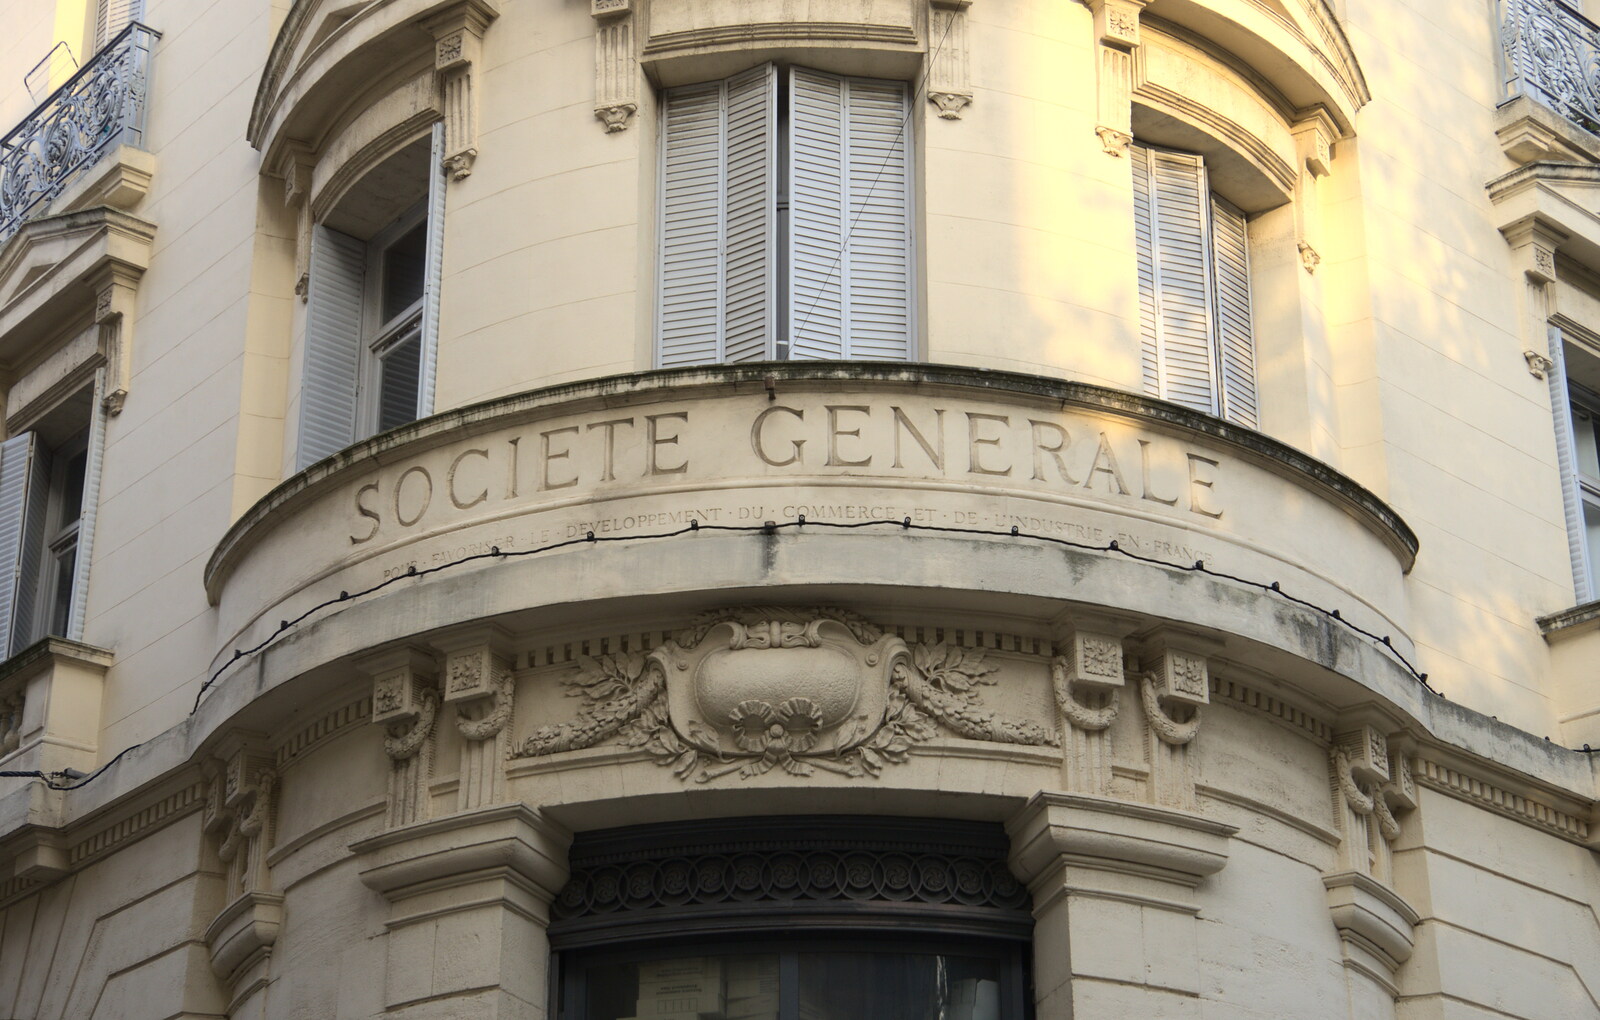 Nice stonework on the Societe Generale's office from A Trip to Carcassonne, Aude, France - 8th August 2018